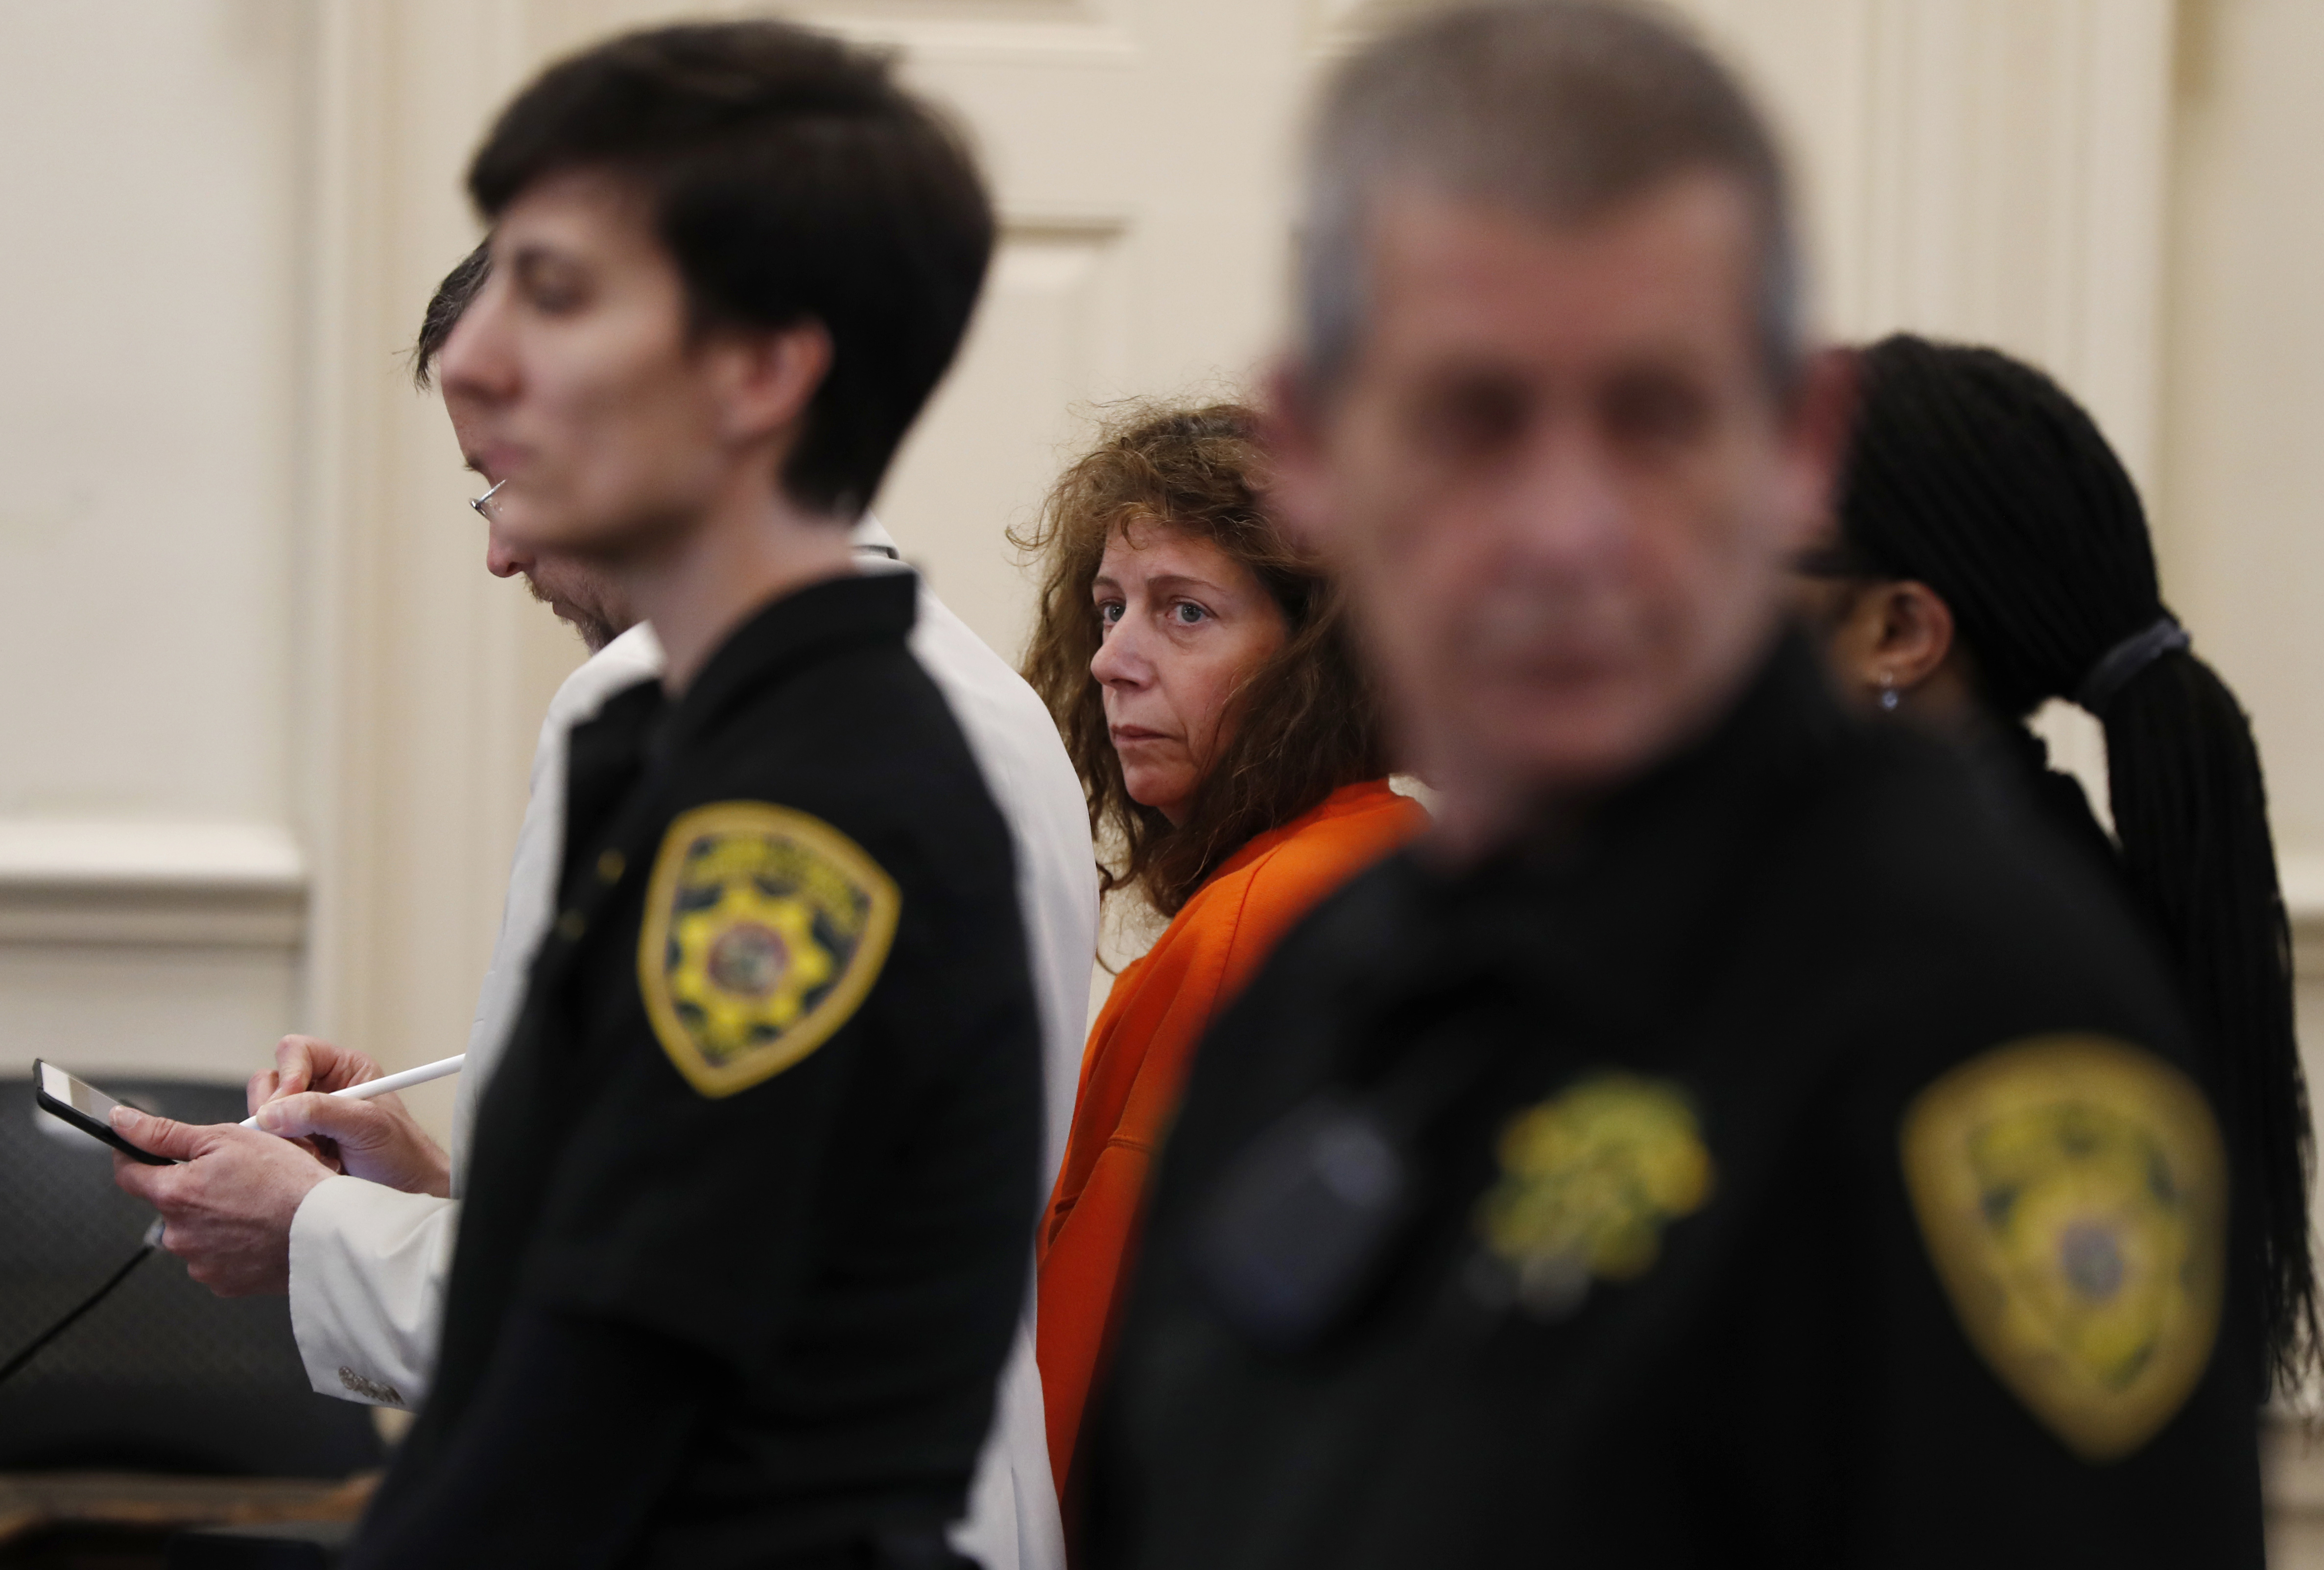 Carol Sharrow, of Sanford, Maine, stands for her arraignment on manslaughter charges at the York County Superior Court in Alfred, Maine on June 4, 2018. (Robert F. Bukaty—AP)